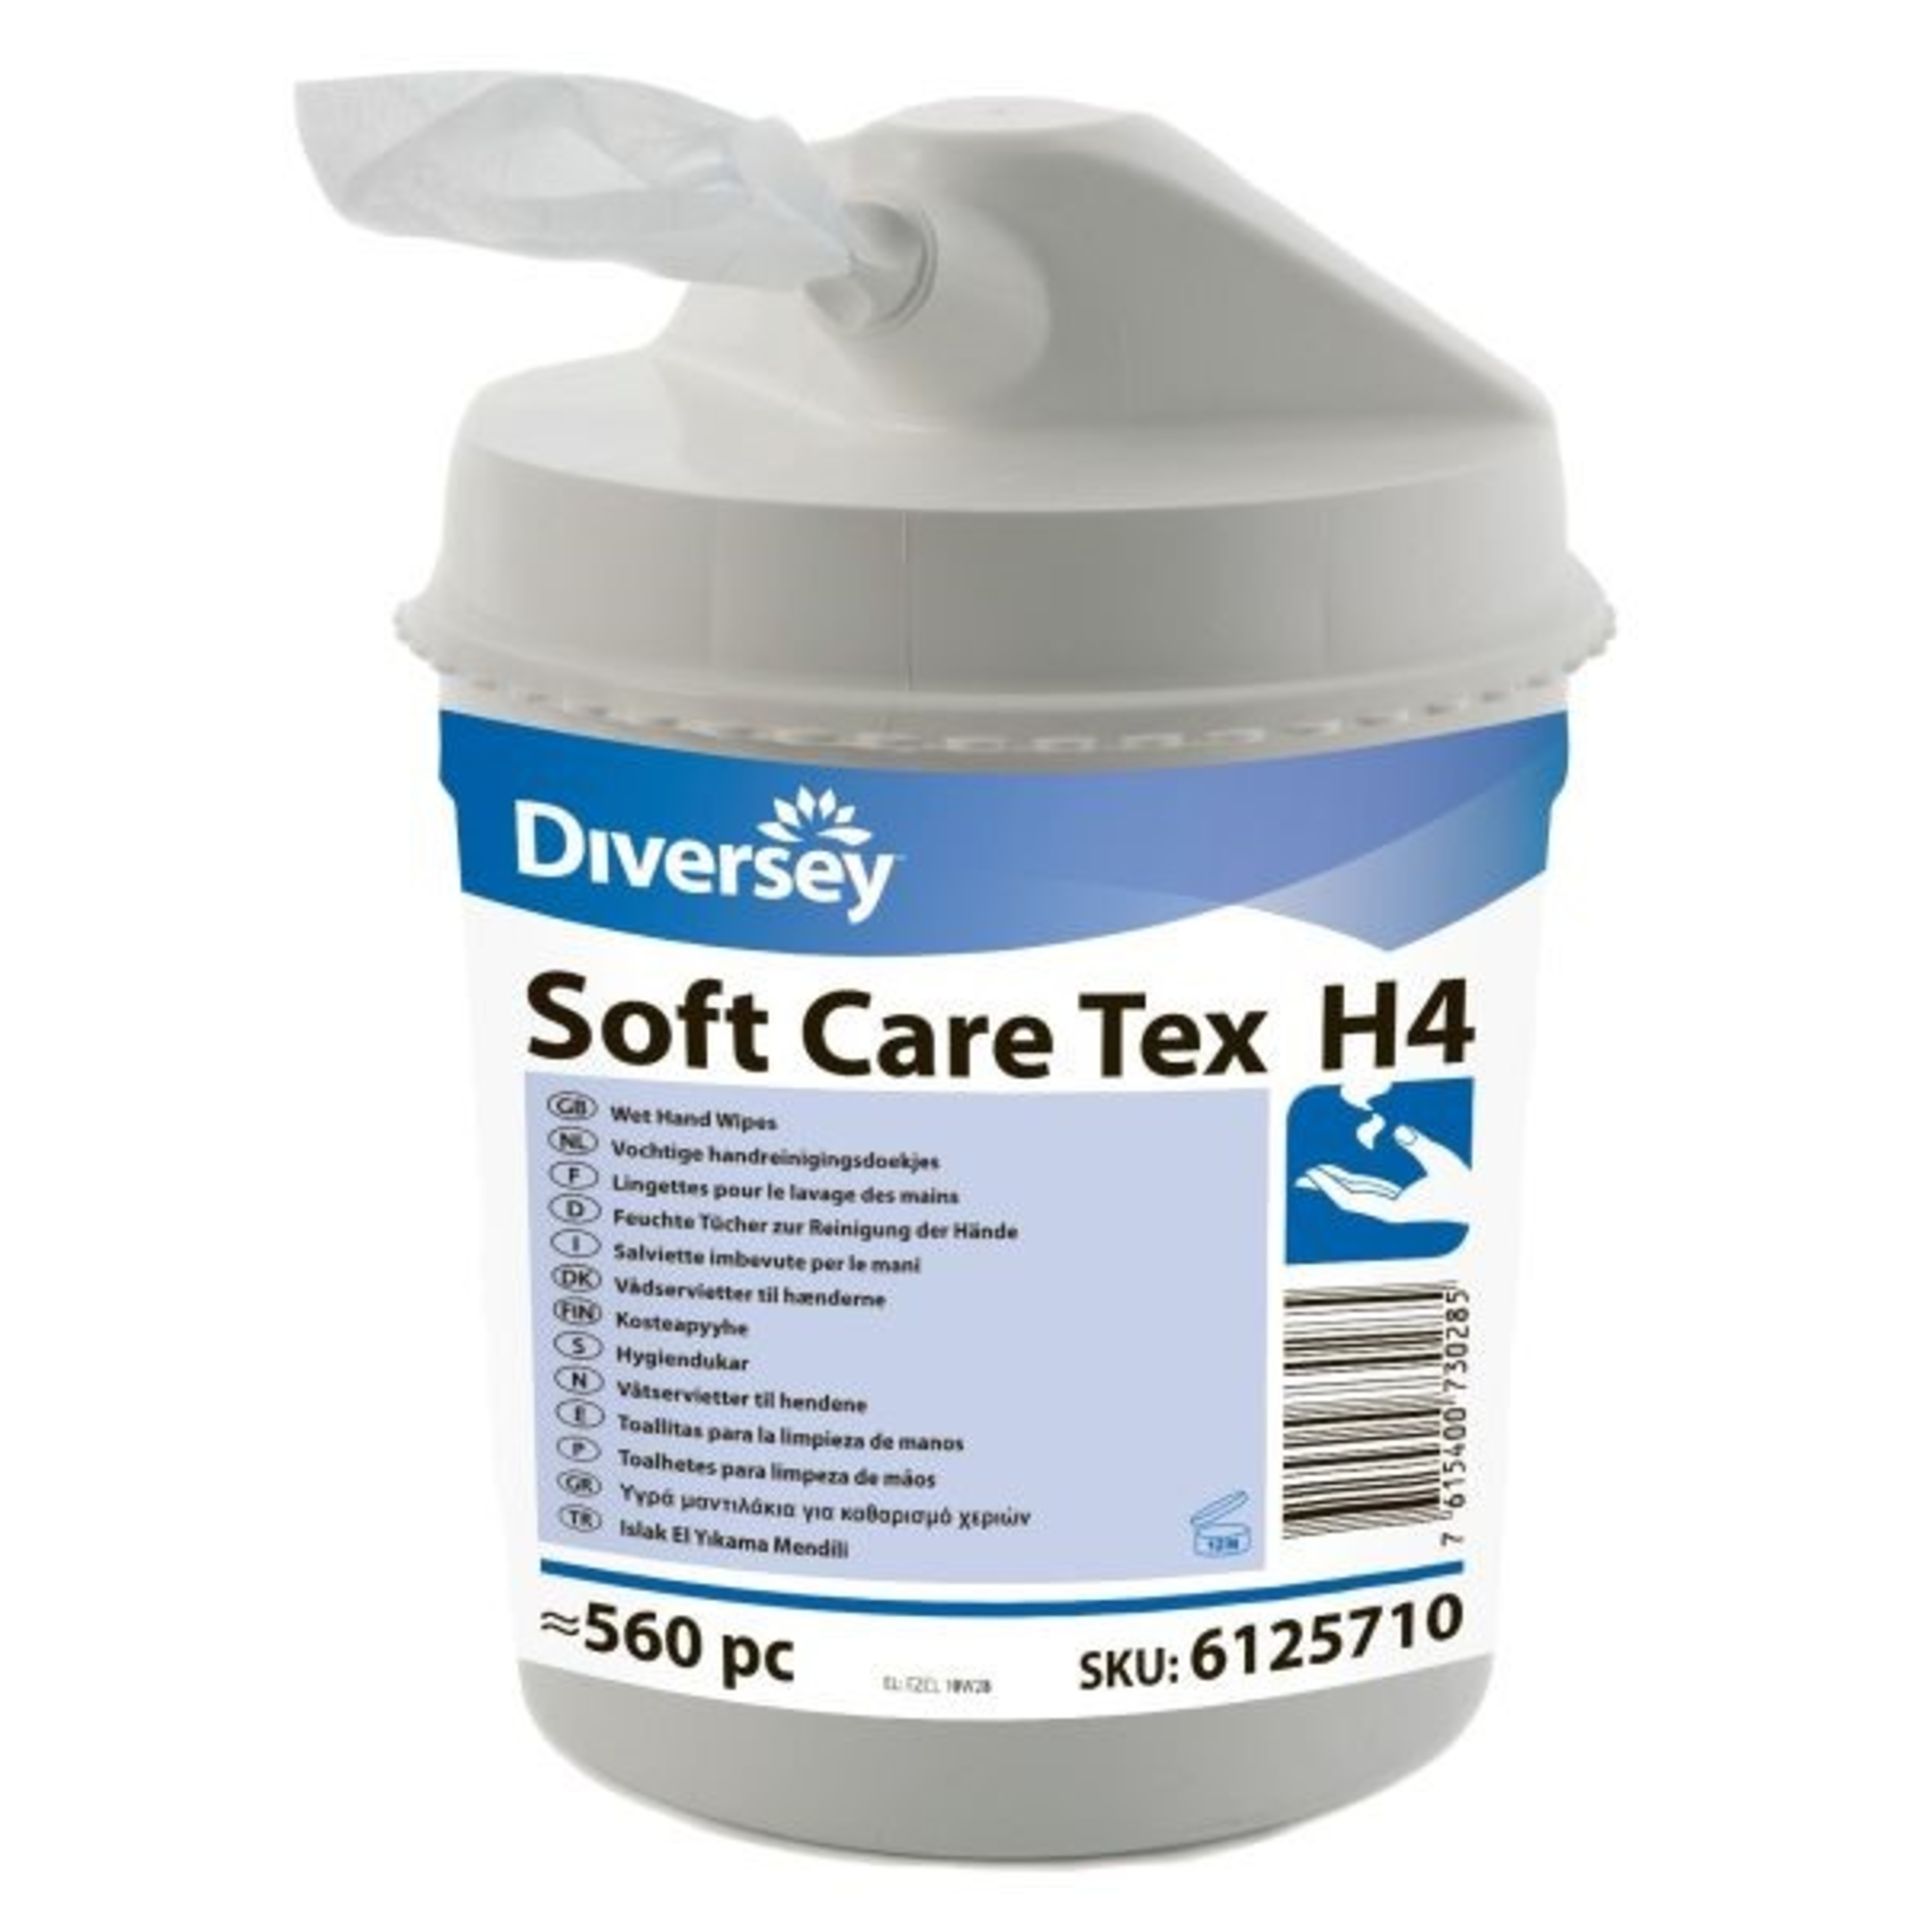 1 AS NEW DIVERSEY SOFT CARE TEX H4 WET HAND WIPES X560 WIPES P/N 87 / RRP £107.16 (VIEWING HIGHLY